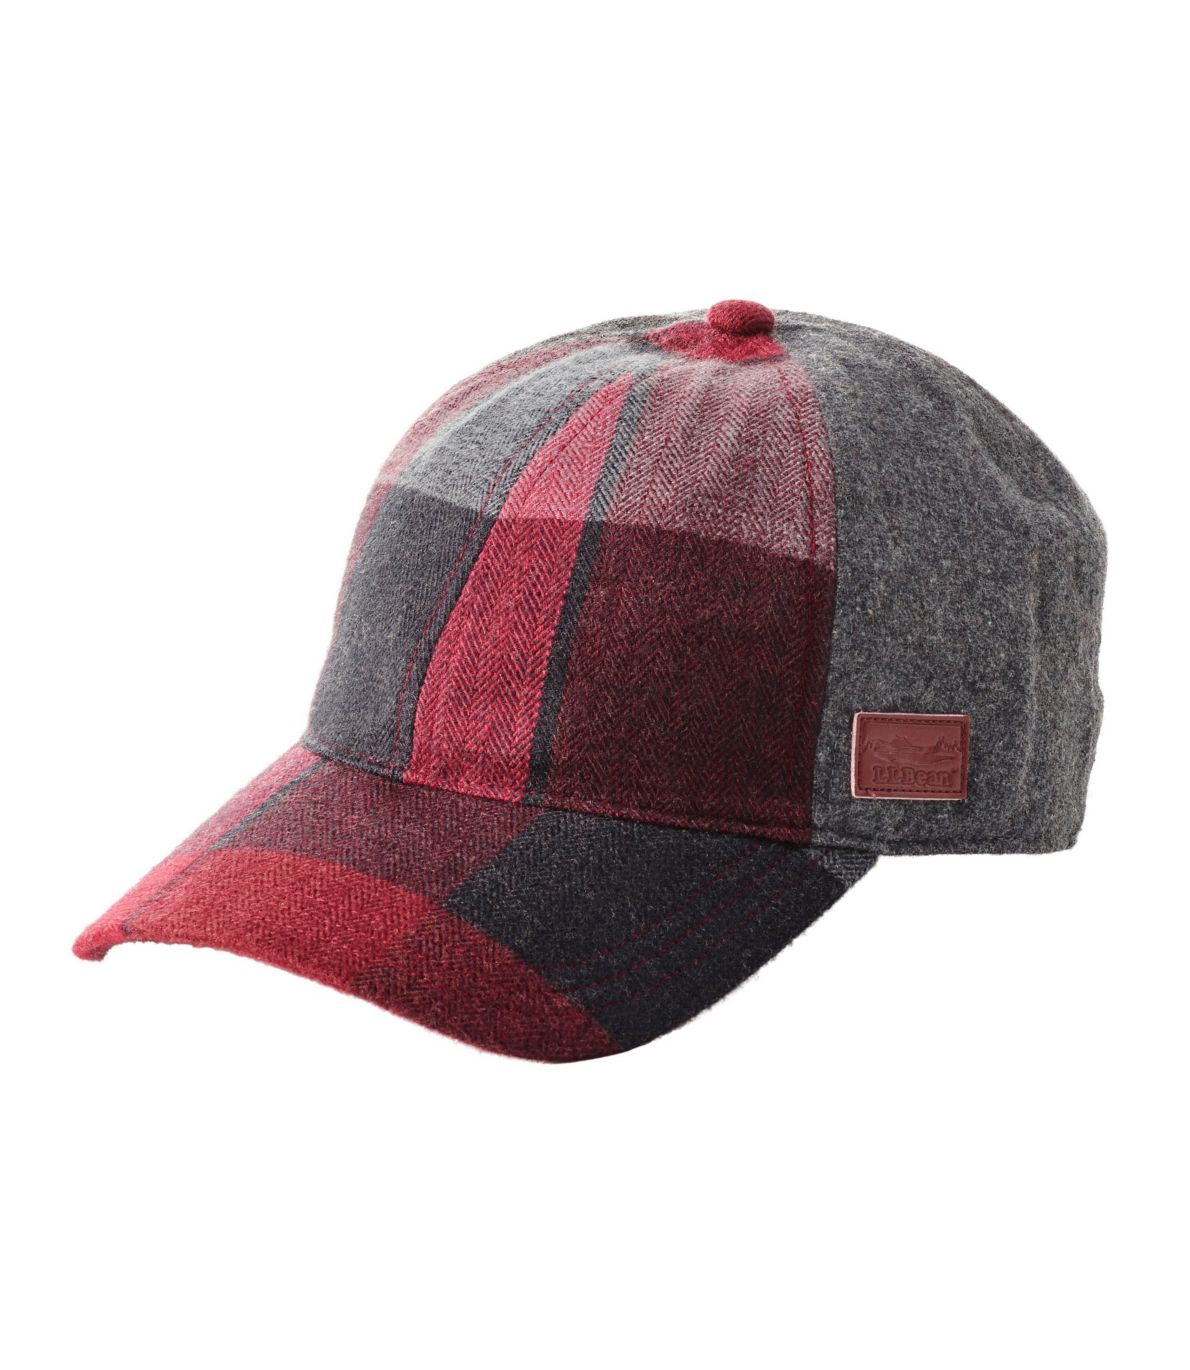 Adults' Overland Wool Cap